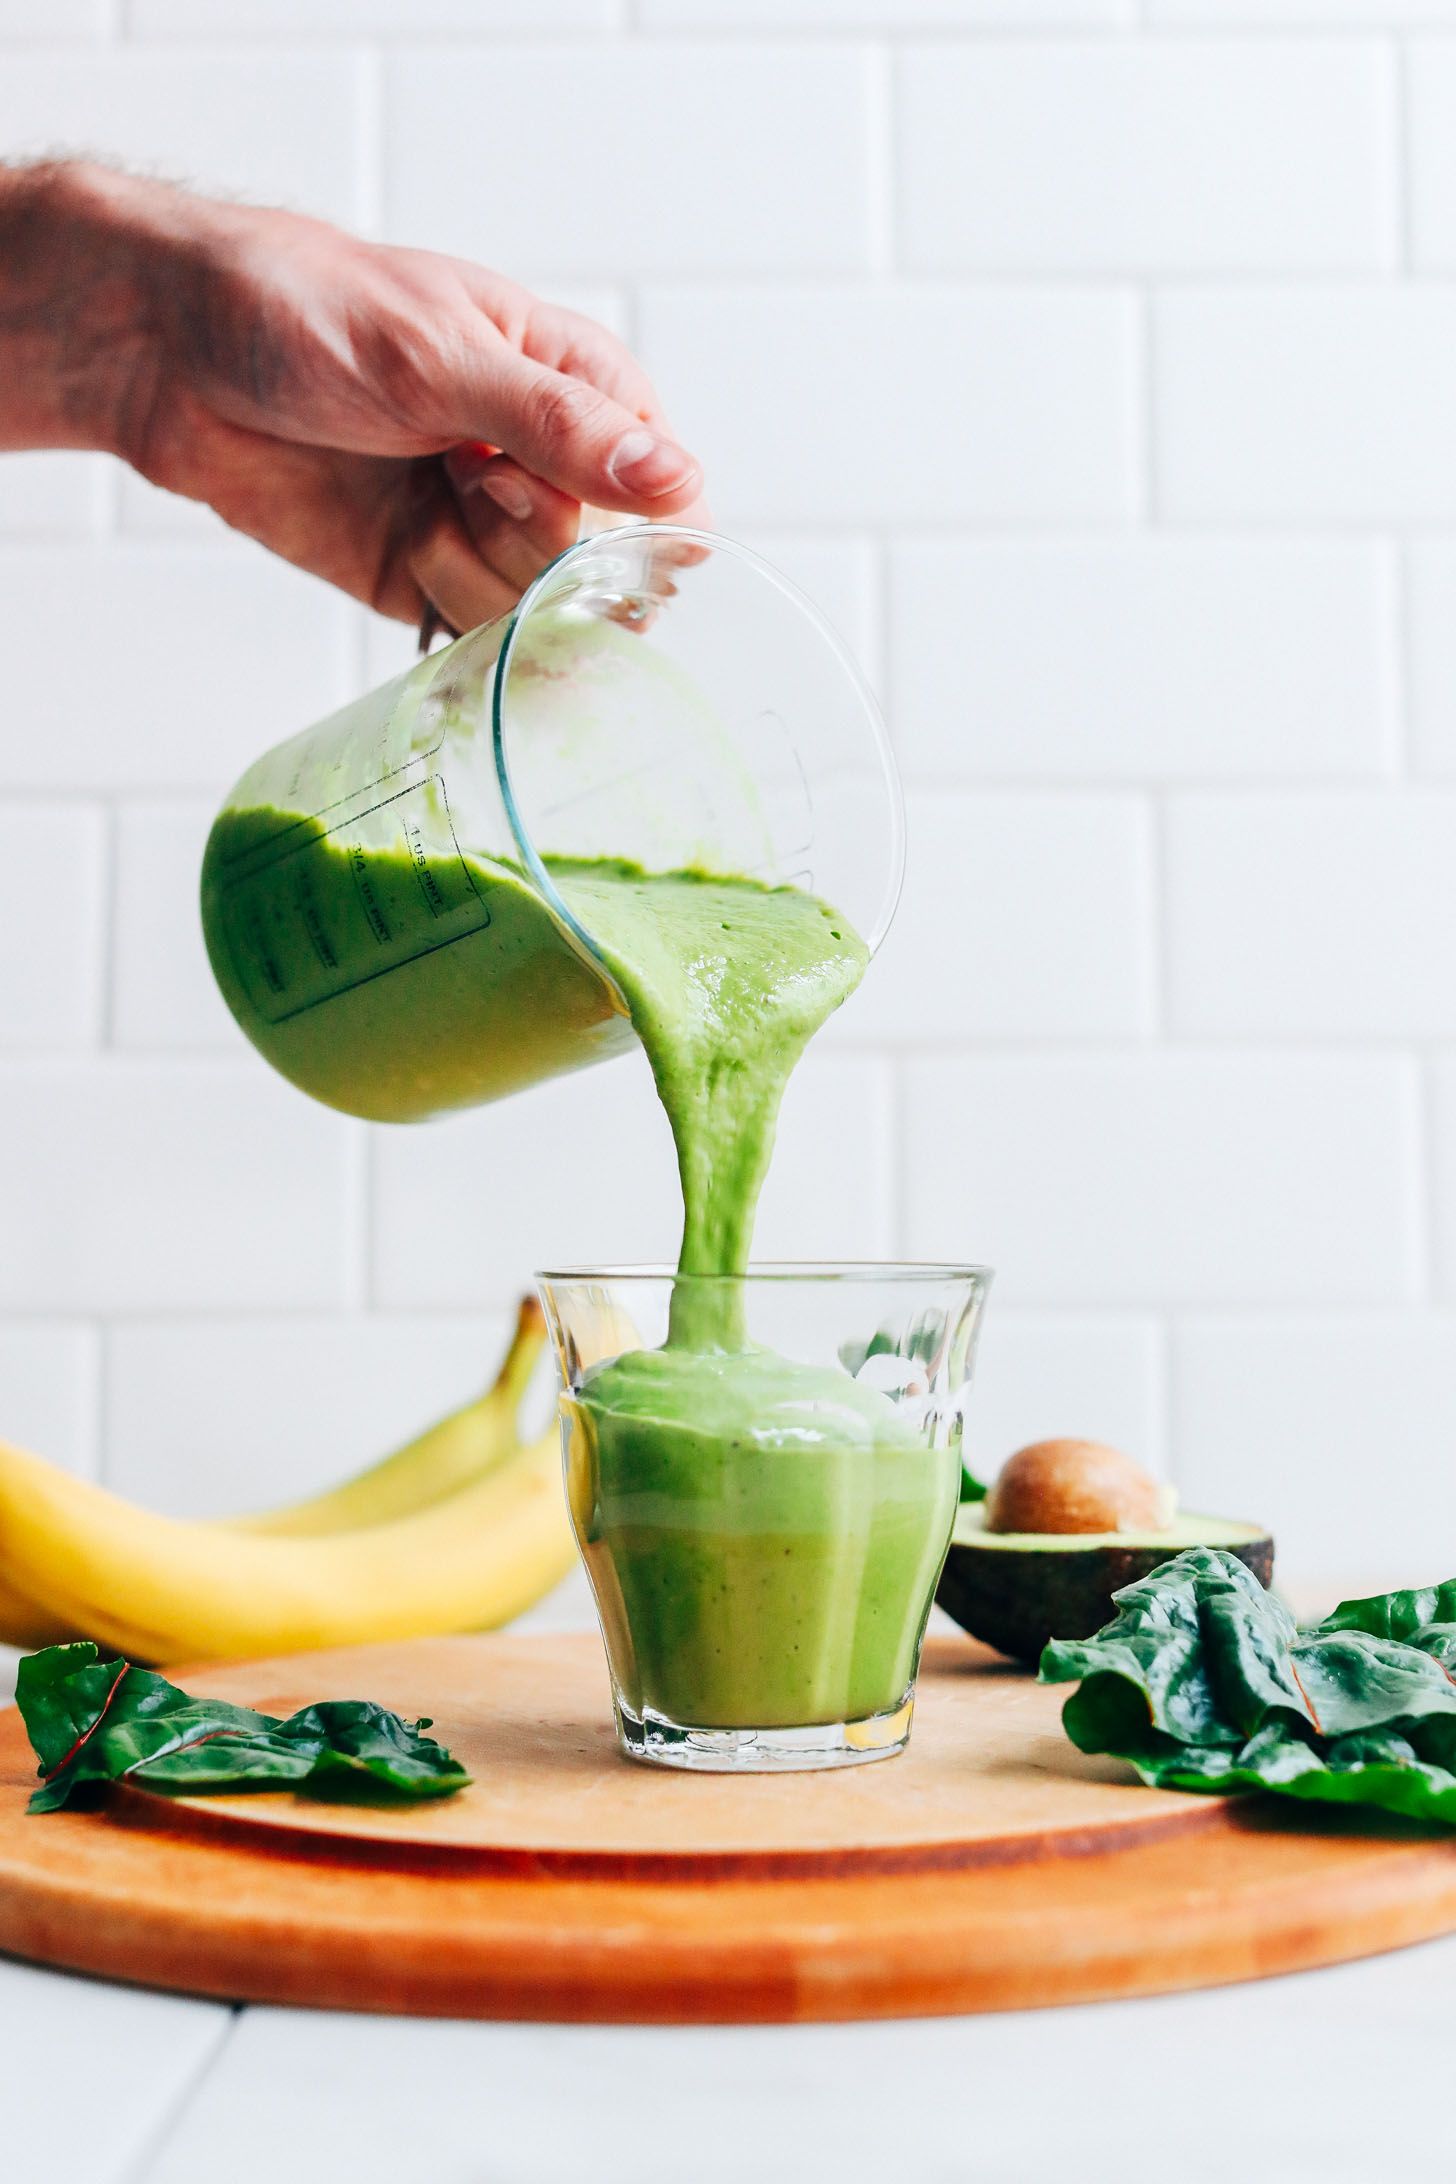 Pouring a glass of Creamy Avocado Green Smoothie for a plant-based snack